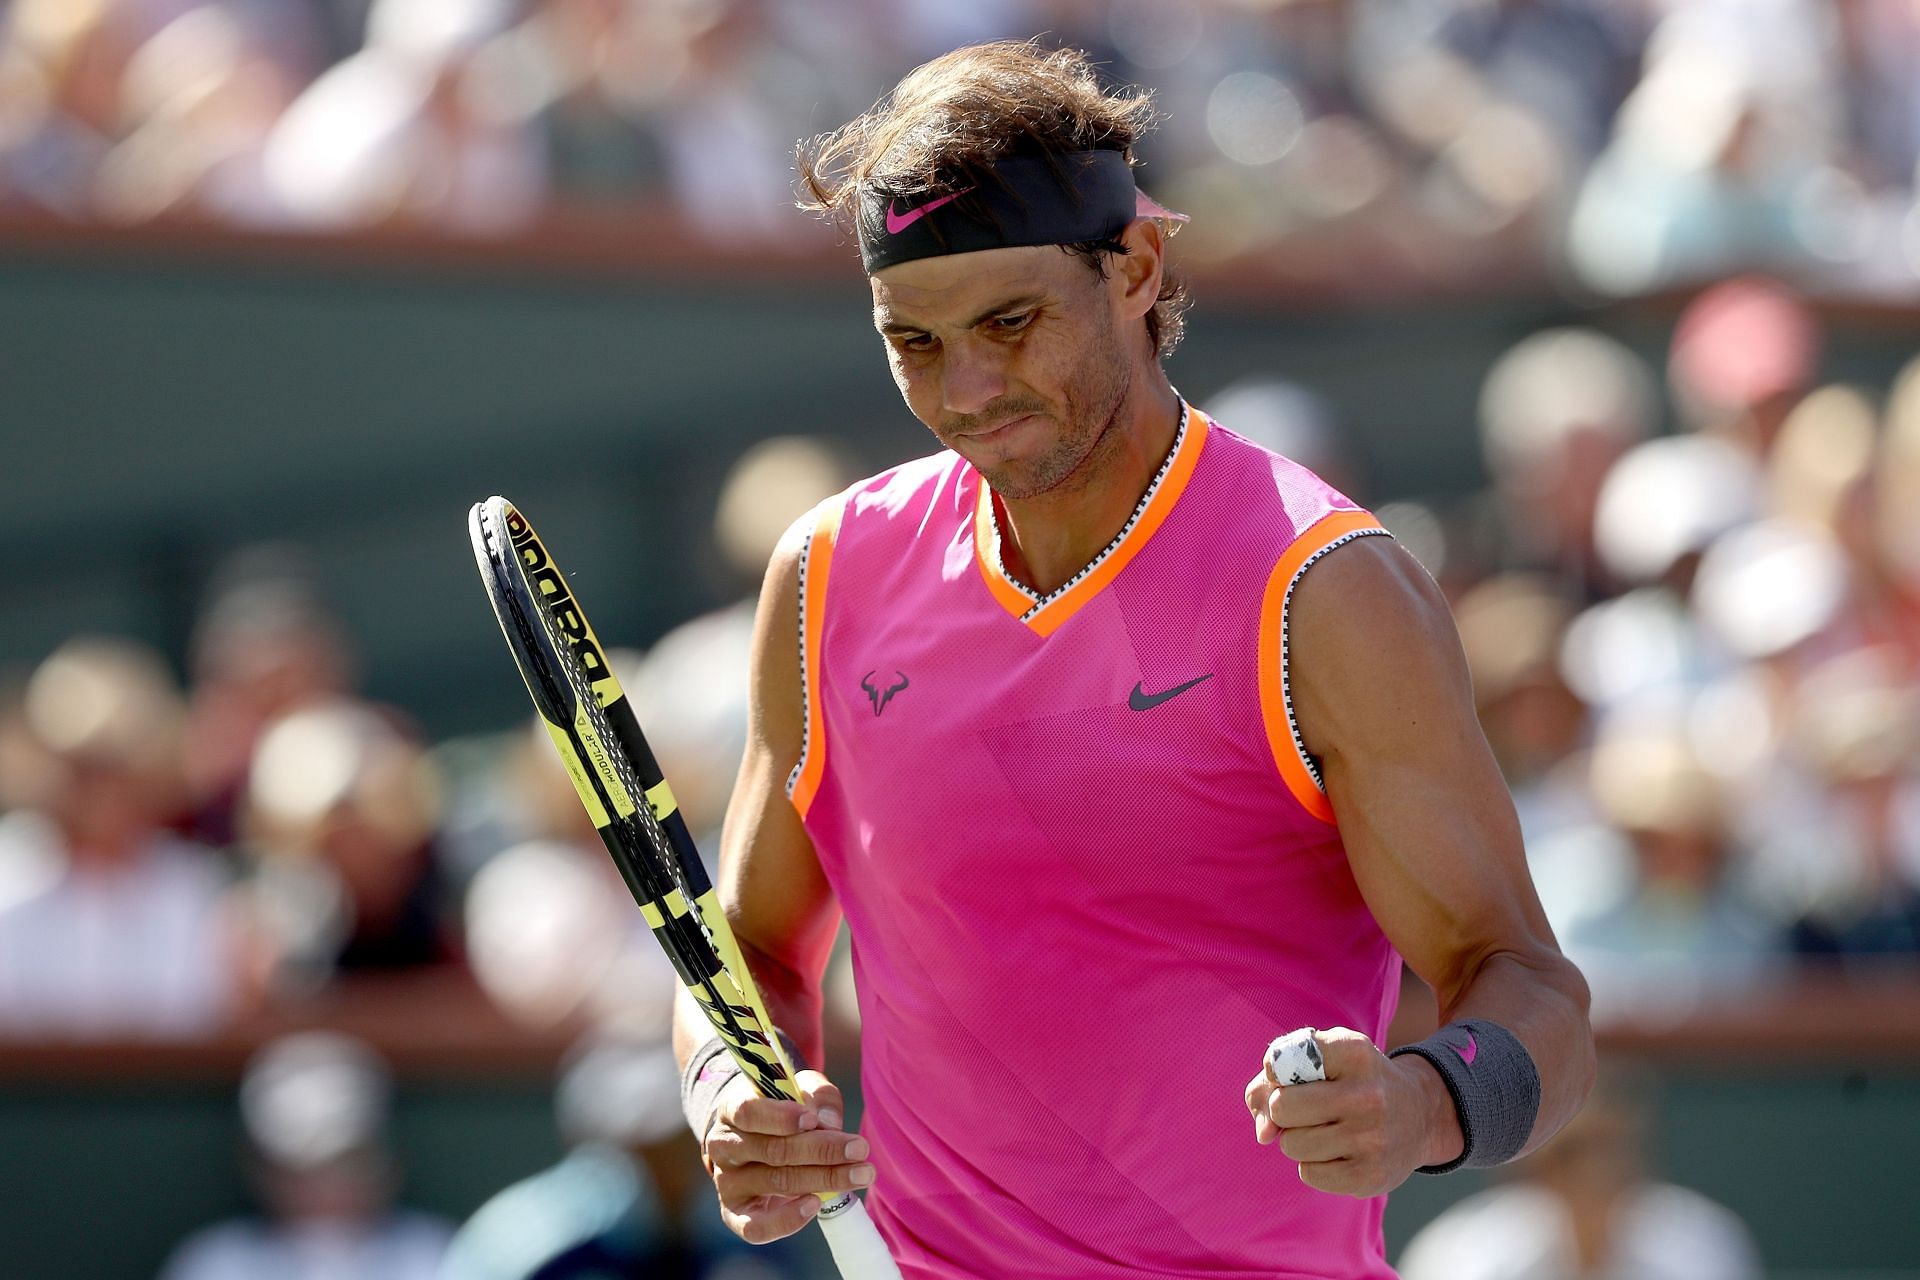 Rafael Nadal stands a chance to win his fourth title at the Indian Wells Masters